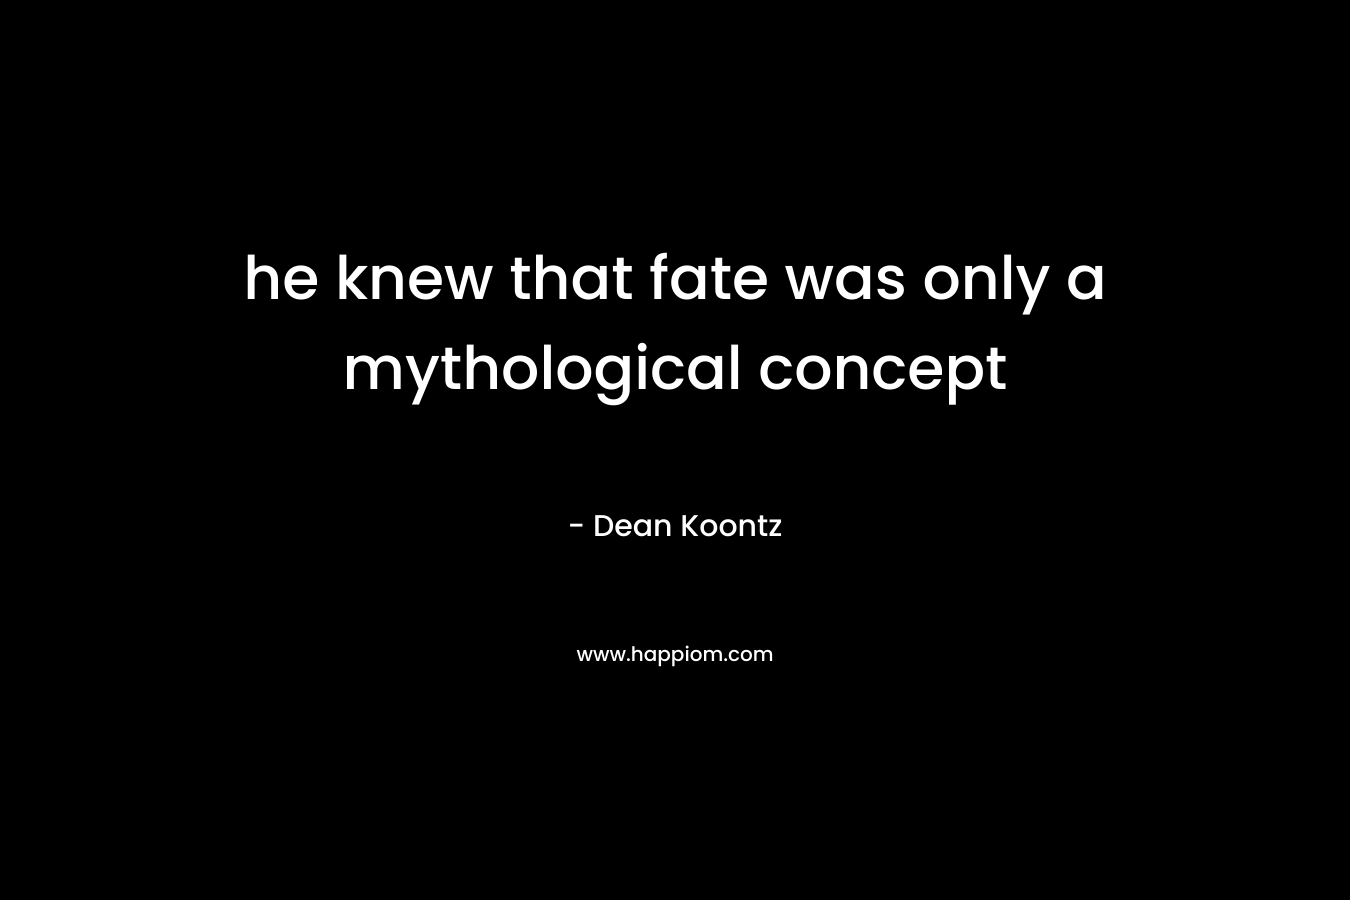 he knew that fate was only a mythological concept